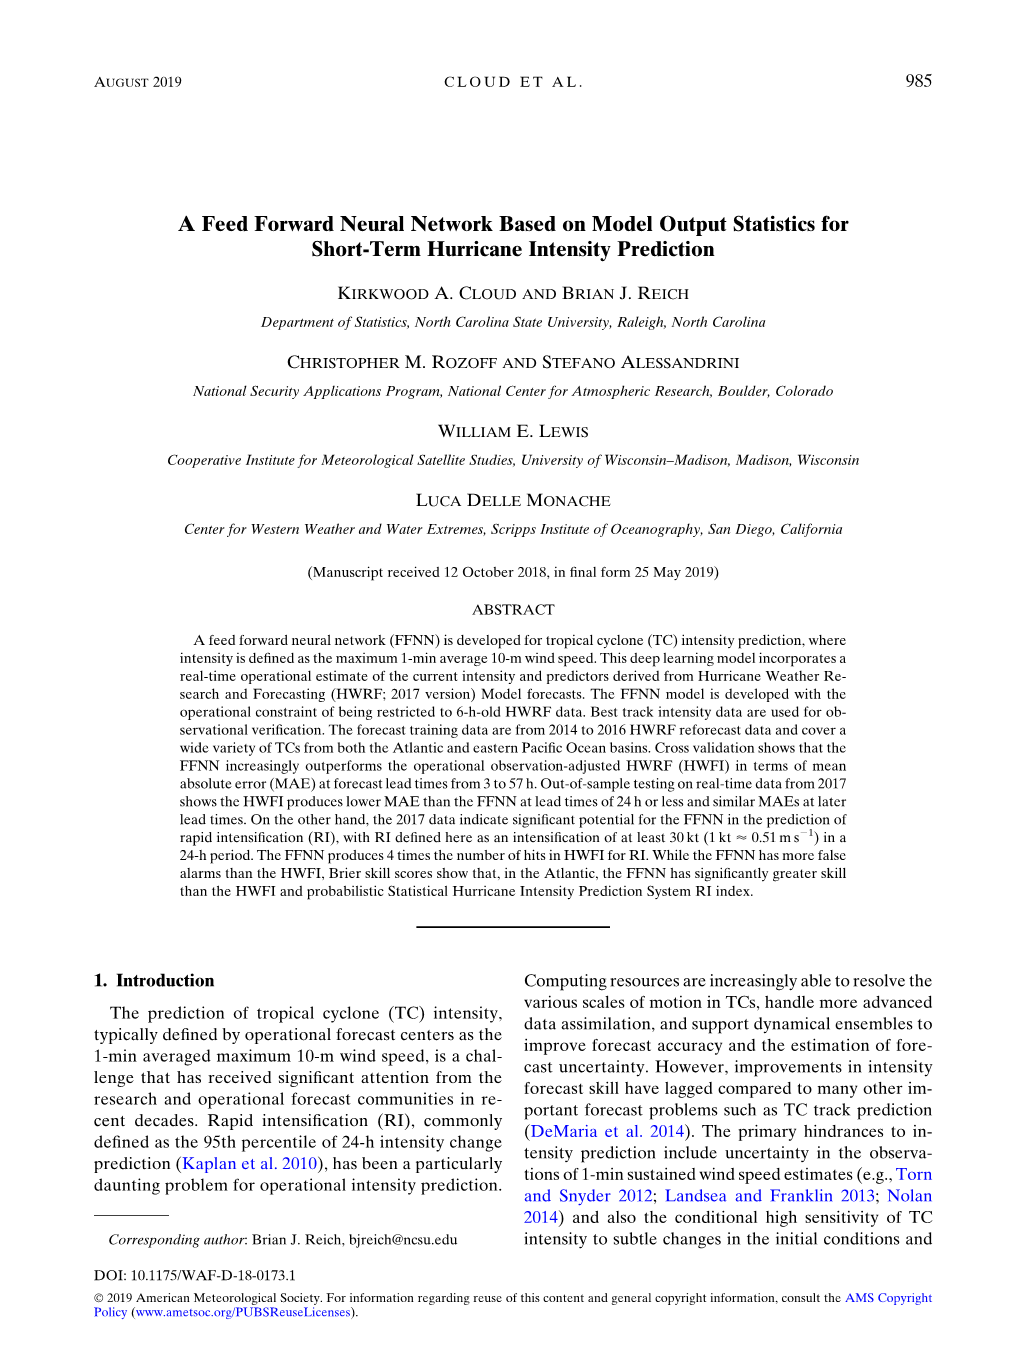 A Feed Forward Neural Network Based on Model Output Statistics for Short-Term Hurricane Intensity Prediction